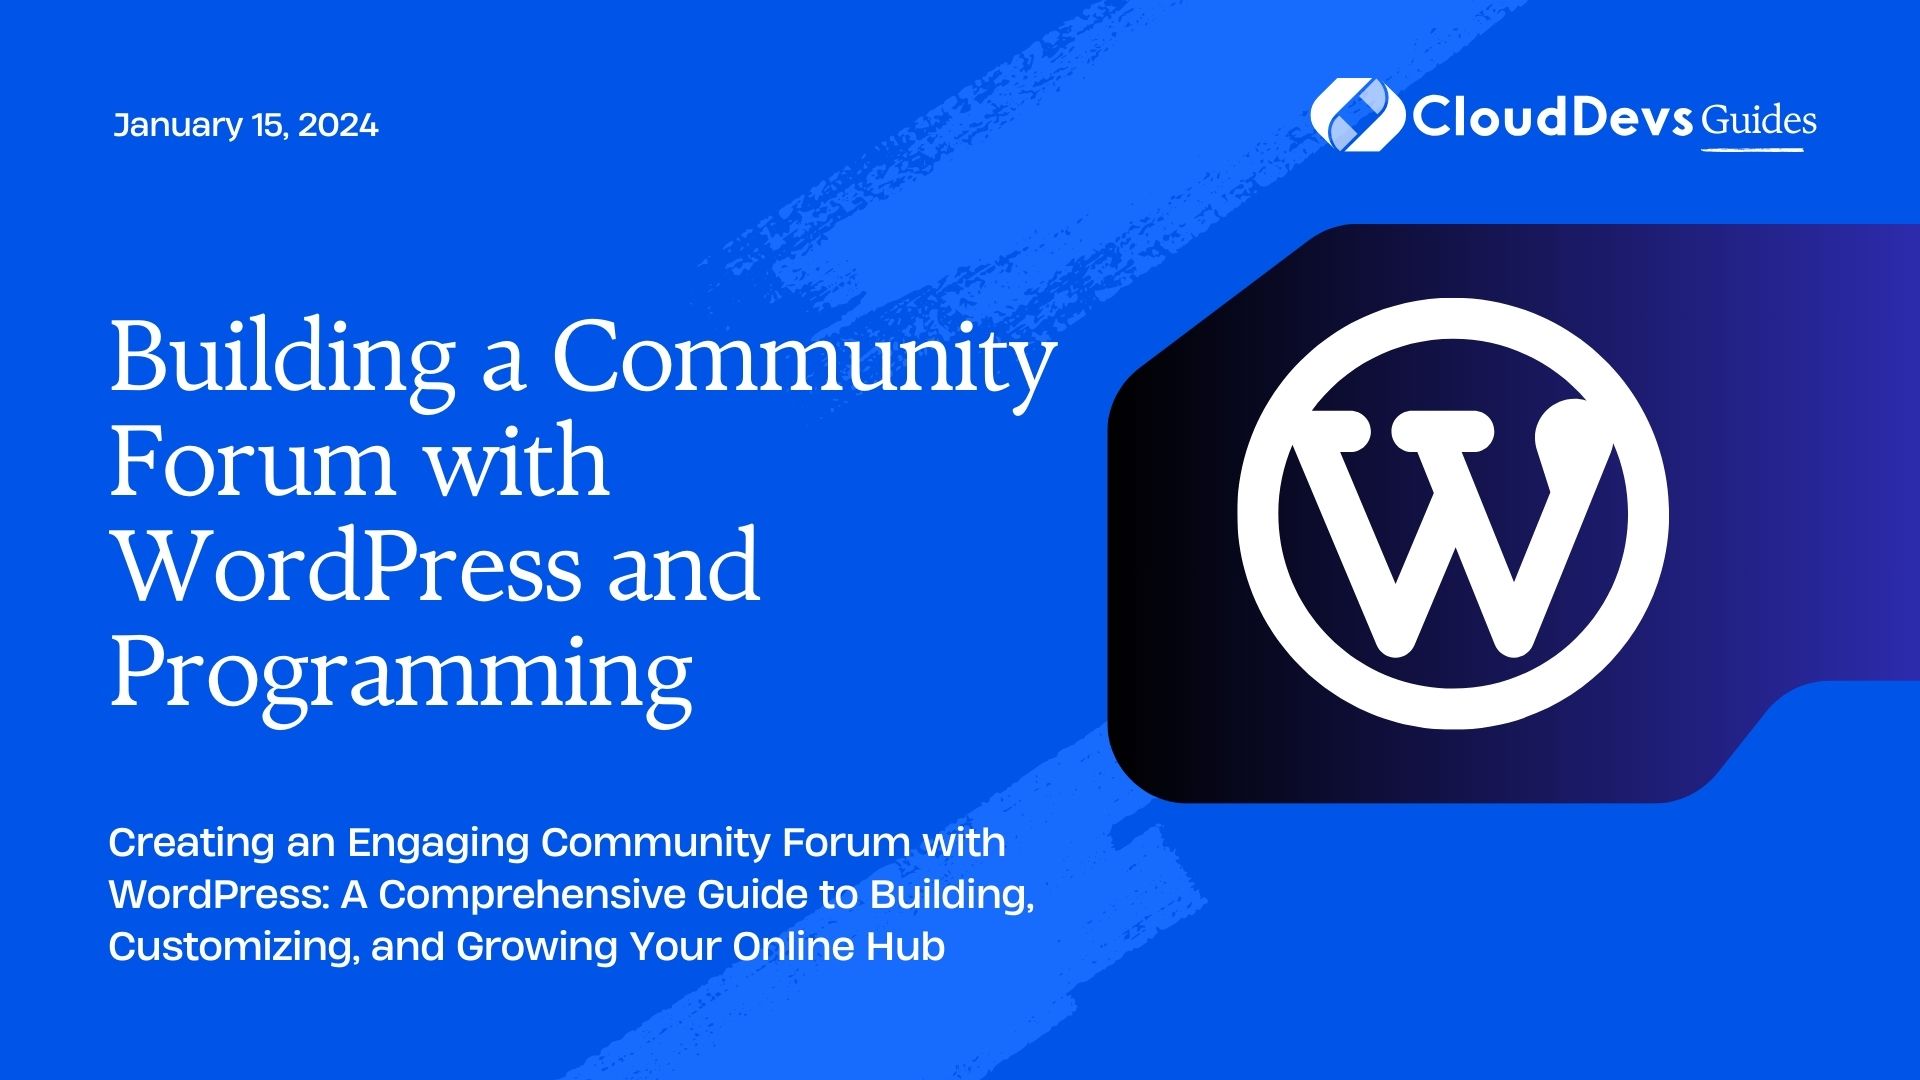 Building a Community Forum with WordPress and Programming